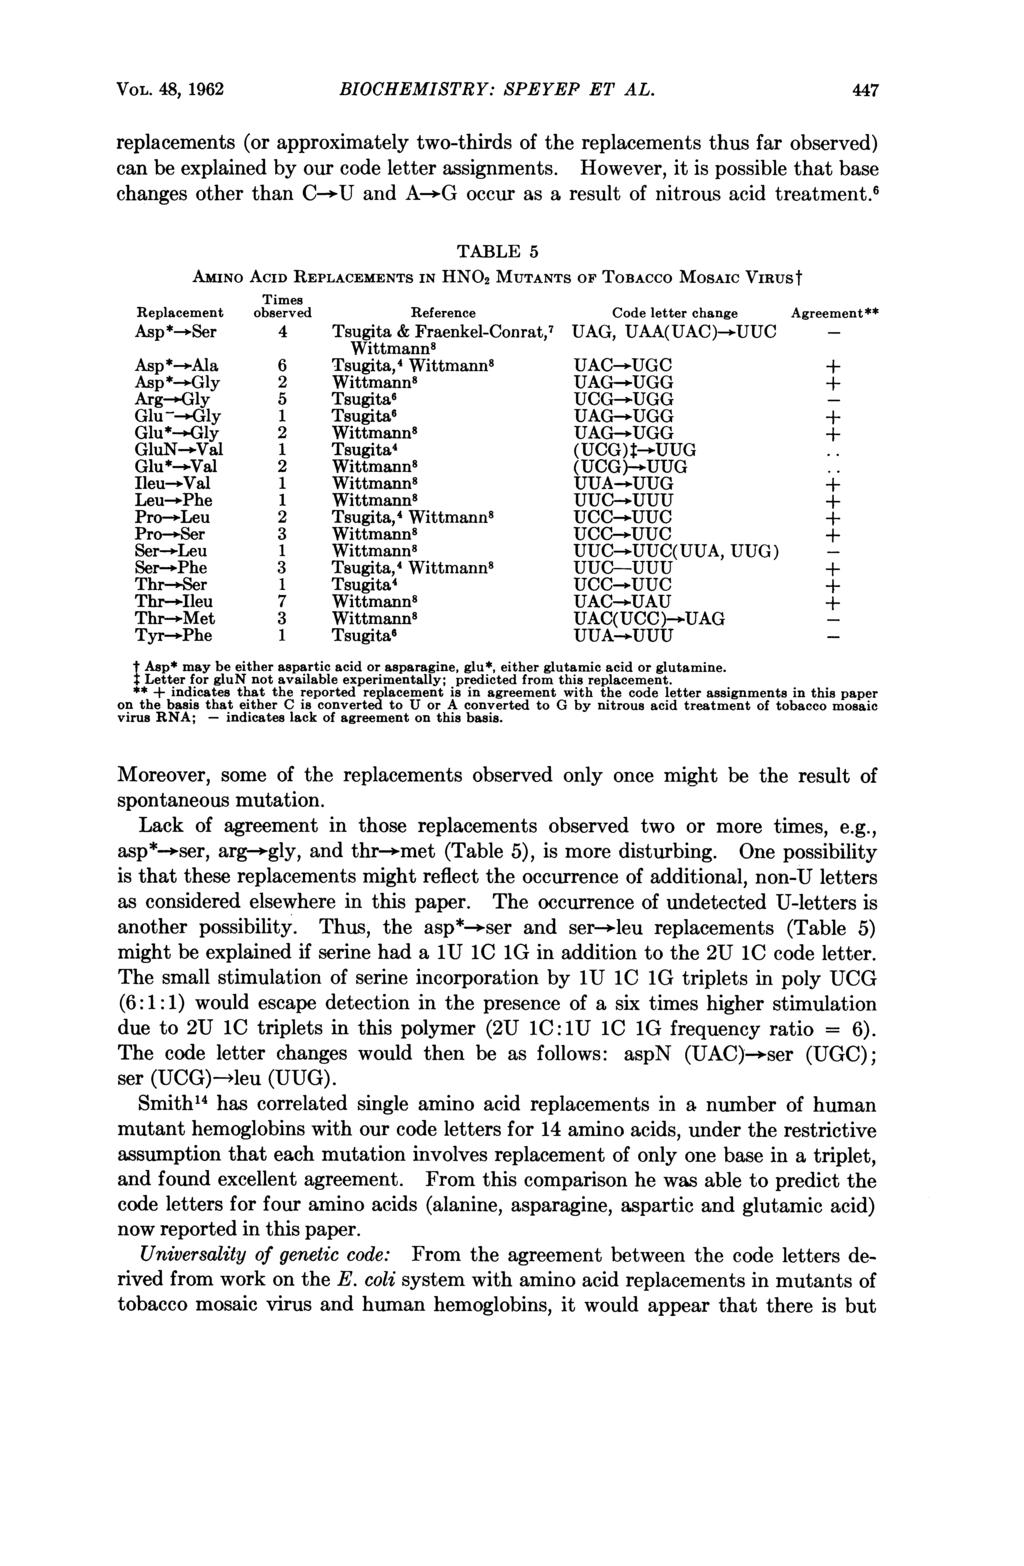 VOL. 48, 1962 BIOCHEMISTRY: SPEYEP ET AL. 447 replacements (or approximately two-thirds of the replacements thus far observed) can be explained by our code letter assignments.